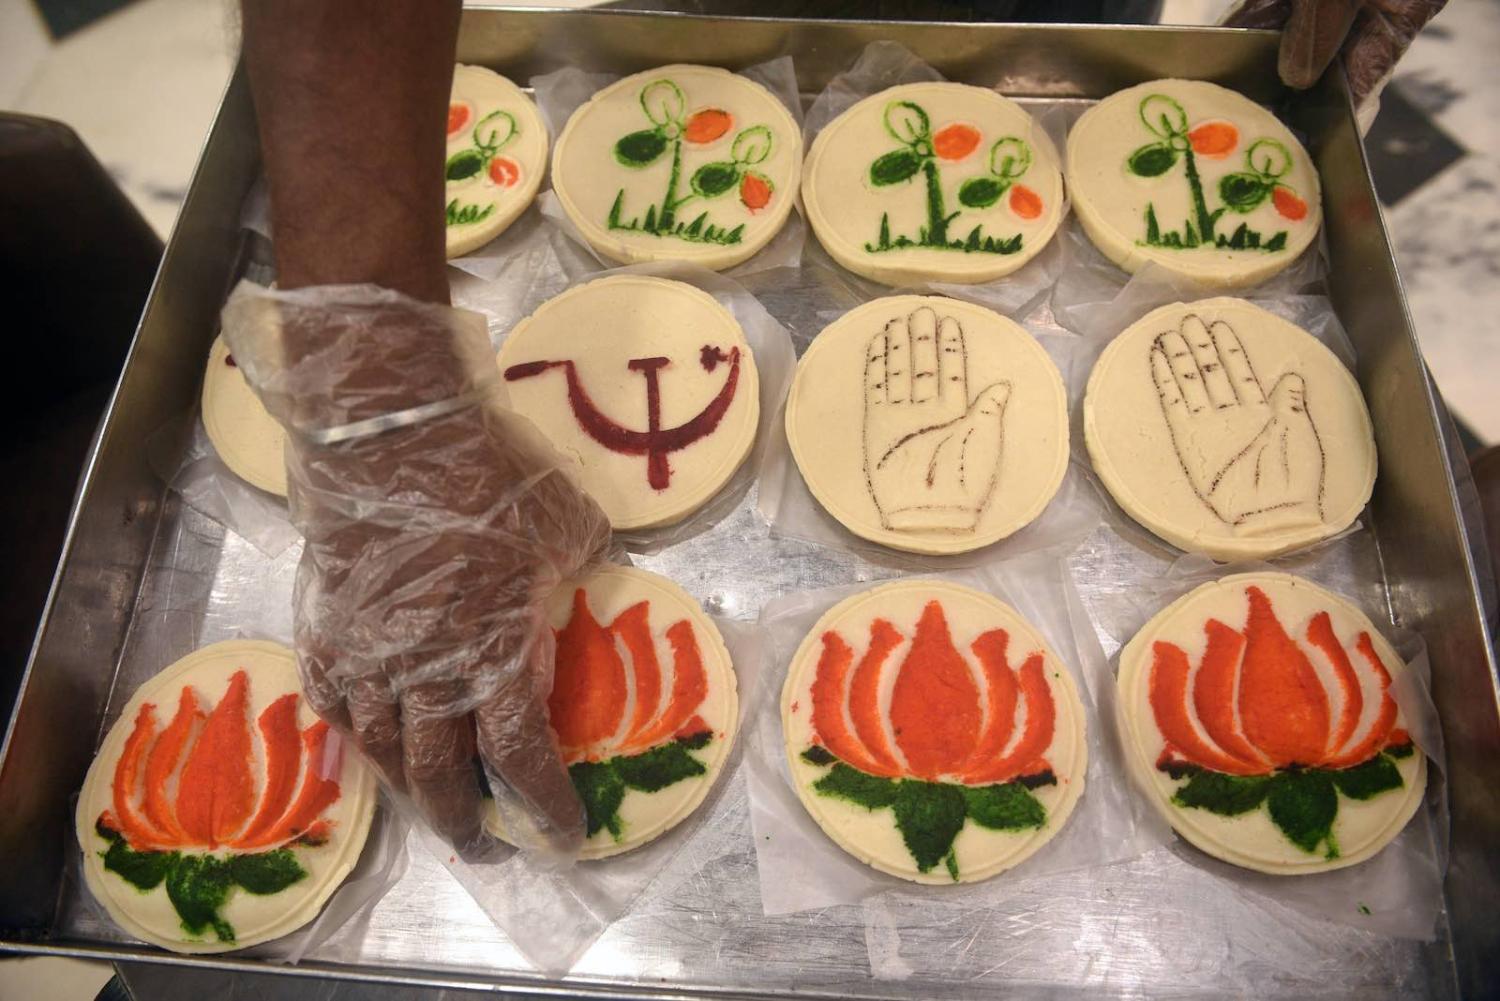 Sweets with political party symbols ahead of West Bengal Assembly election (Samir Jana/Hindustan Times via Getty Images)